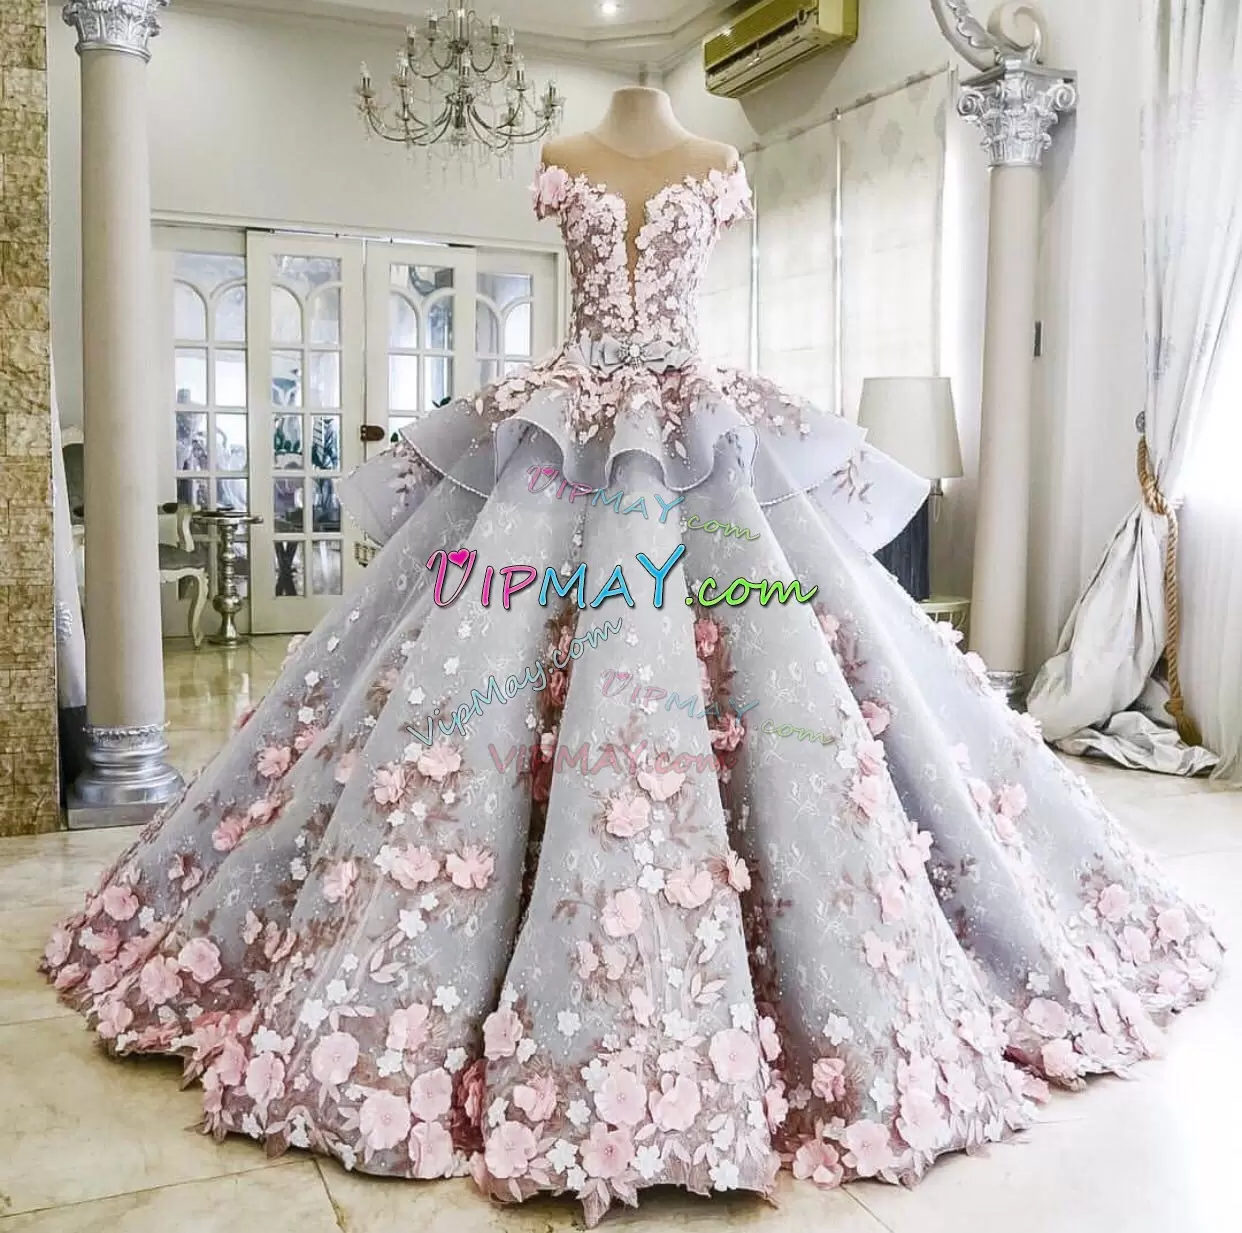 quinceanera dress without people,quinceanera dress 2020,see through bodice quinceanera dress,satin and tulle quinceanera dress,quinceanera dress with 3d flowers,quinceanera dress with long trains,quinceanera dress with a train,quinceanera dress with long train,handmade flower quinceanera dress,satin gown with beaded waist and illusion back,custom made quinceanera dress houston tx,